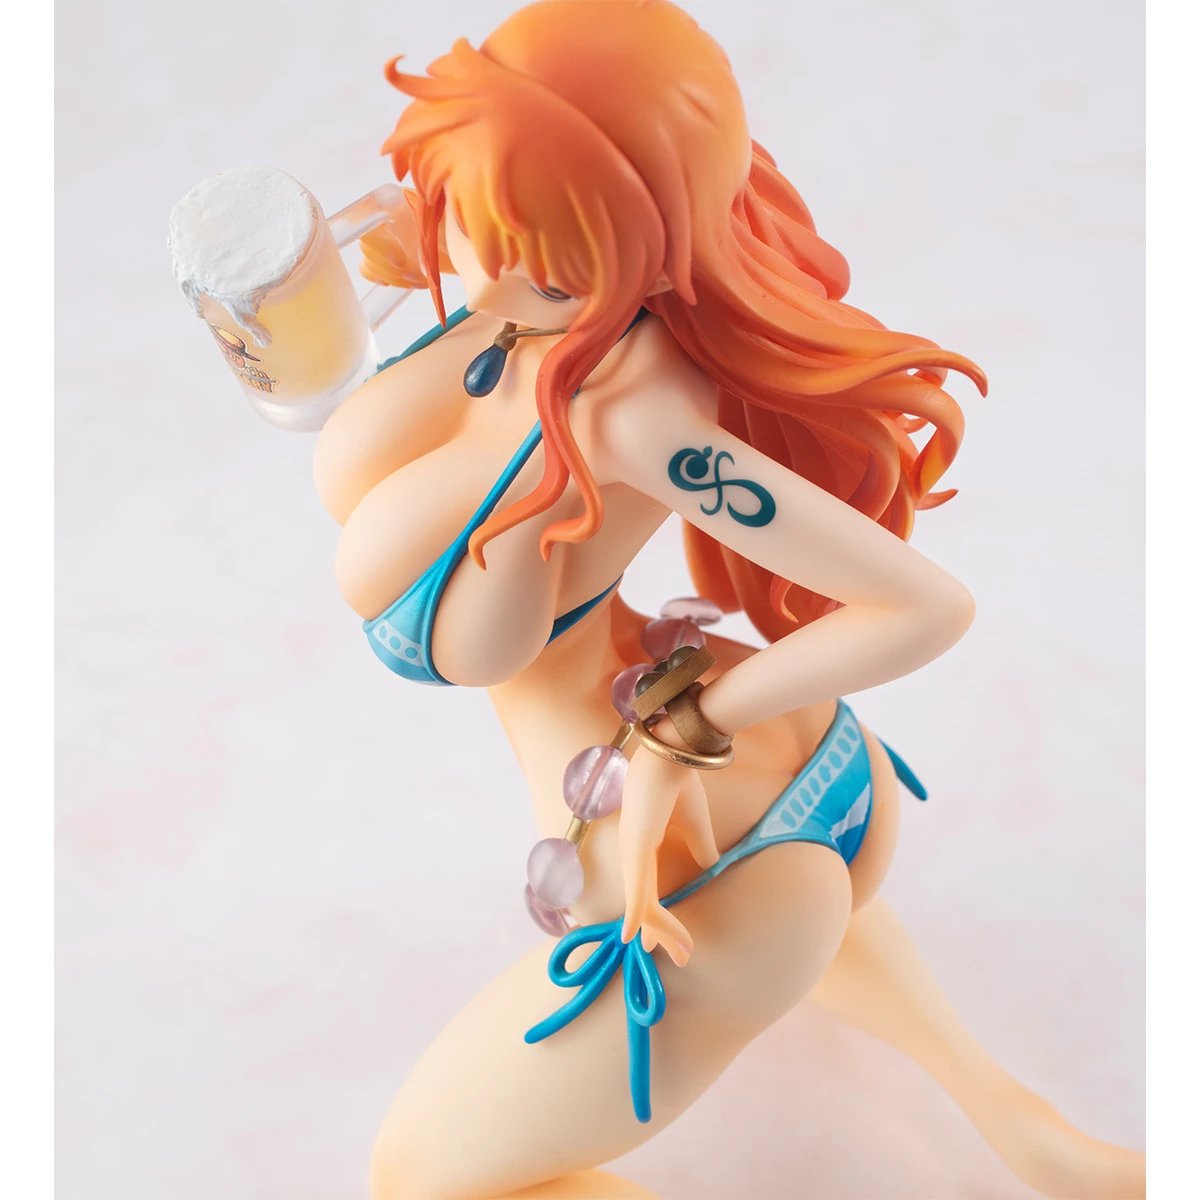 We were also surprised to see a re-run of this rare Portrait of Pirates figure! 👒🏴‍☠️ Fans of #OnePiece will want to add this Limited Edition Nami Ver. BB_SP 20th Anniversary figure to their collection‼️ ➡️ Pre-order: otakumode.com/fb/imw